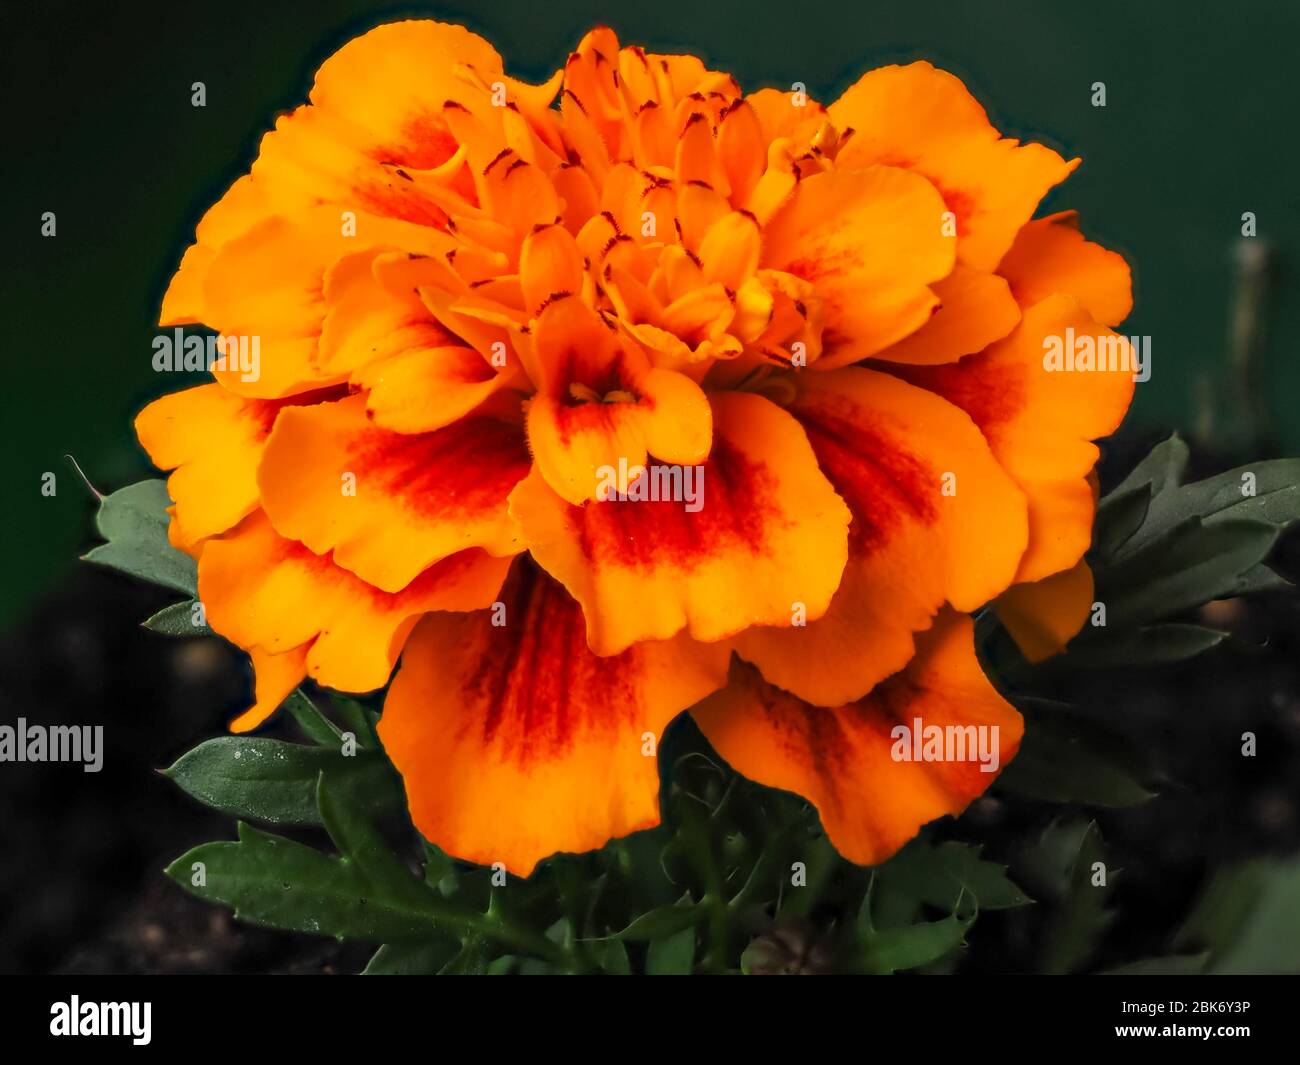 Closeup of a bright orange and yellow French marigold flower, Tagetes patula Stock Photo